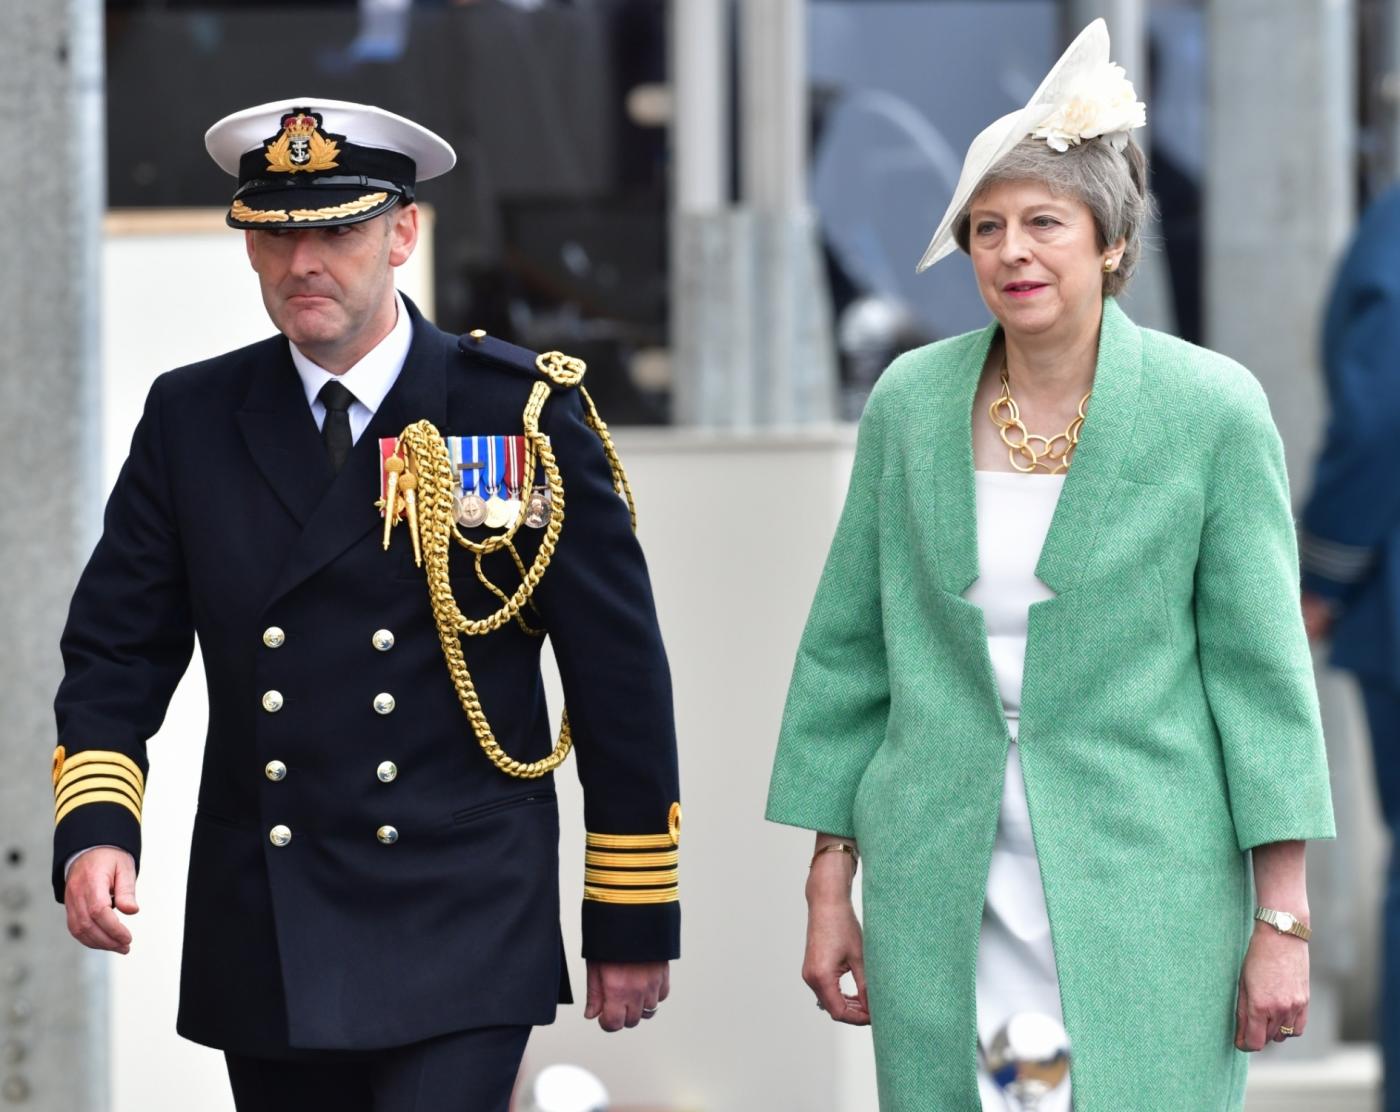 PORTSMOUTH (BRITAIN), June 5, 2019 (Xinhua) -- British Prime Minister Theresa May (R) attends the D-Day commemorations in Portsmouth, Britain, on June 5, 2019. British Prime Minister Theresa May and 15 world leaders joined Queen Elizabeth II in the English naval port city of Portsmouth Wednesday to commemorate the 75th anniversary of the D-Day landings. (Xinhua/IANS) by . 